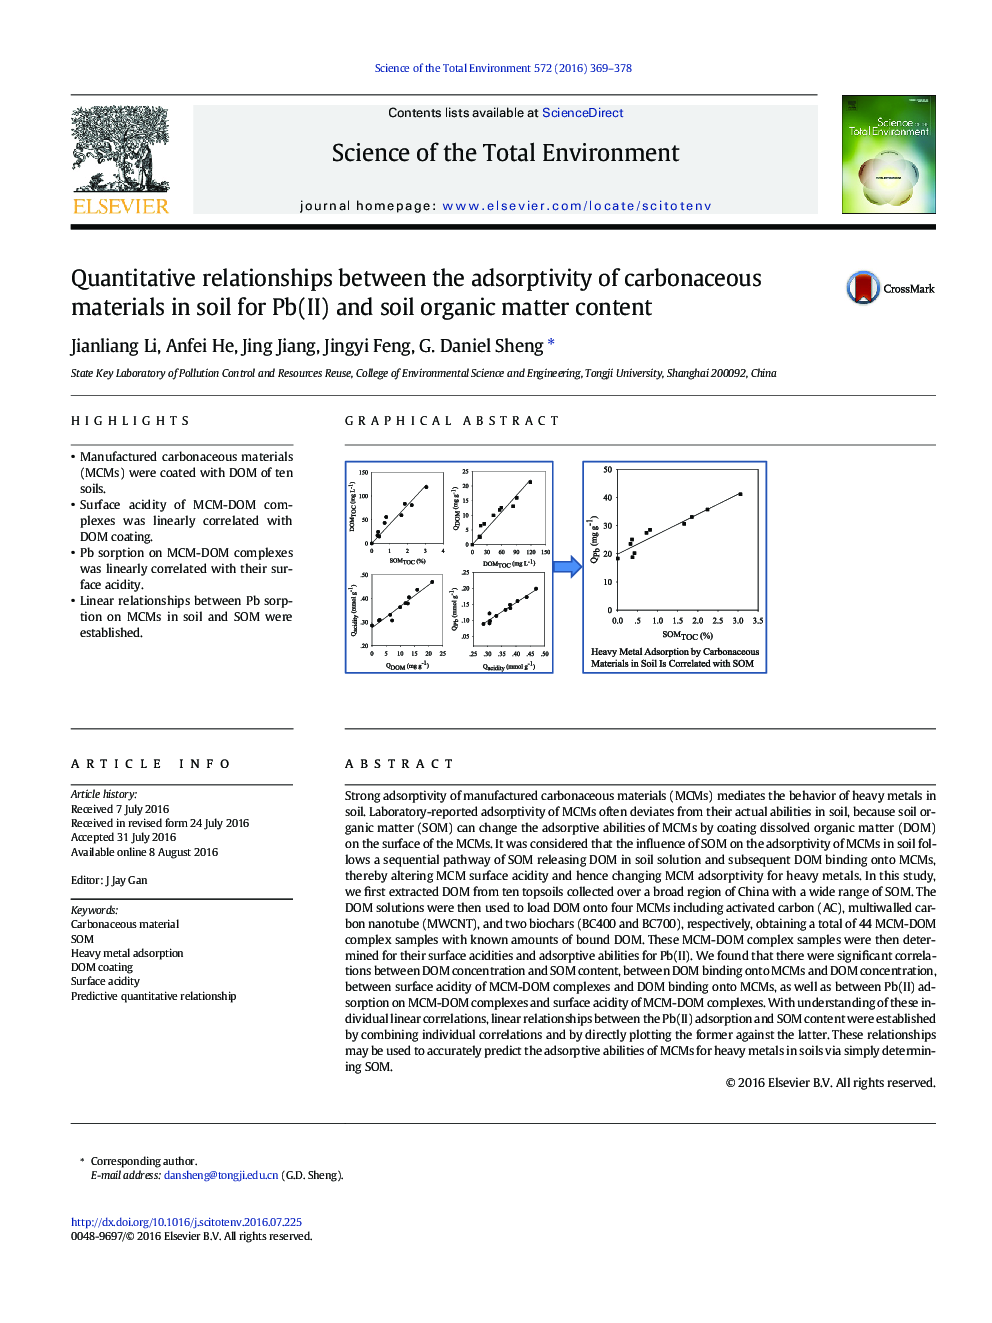 Quantitative relationships between the adsorptivity of carbonaceous materials in soil for Pb(II) and soil organic matter content